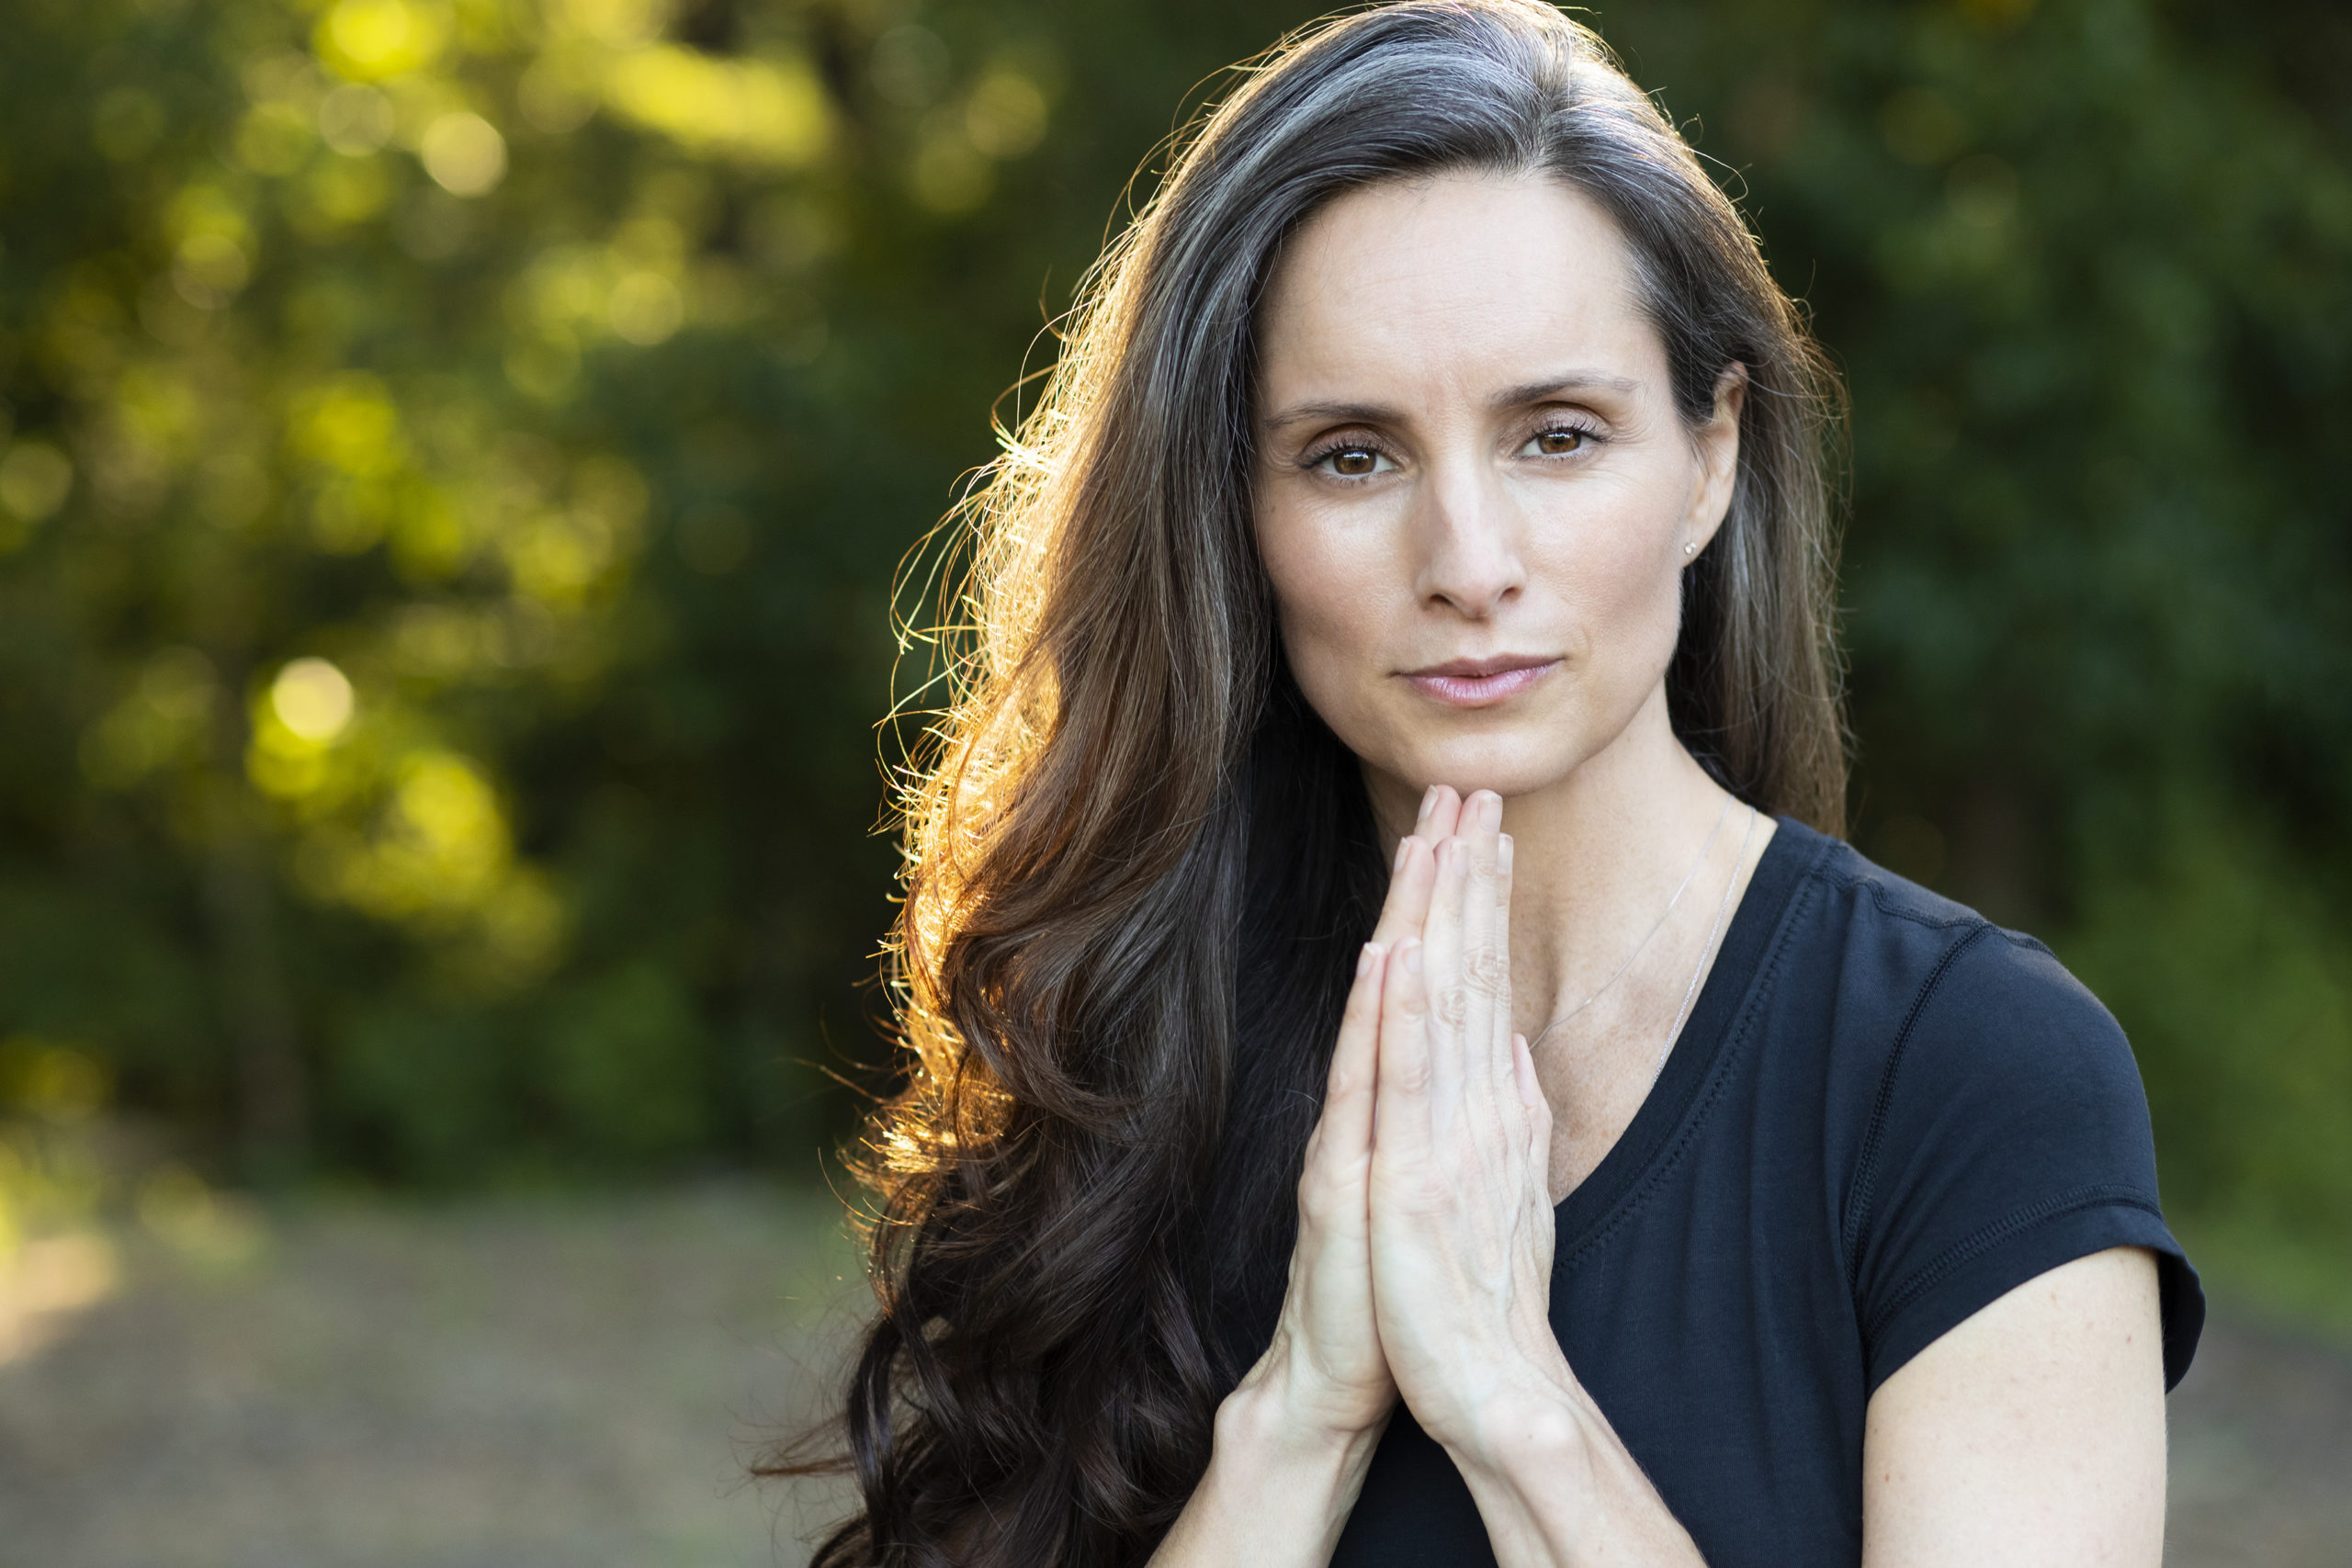 Energy & Relationships with Intuitive Energy Healer Dana Childs